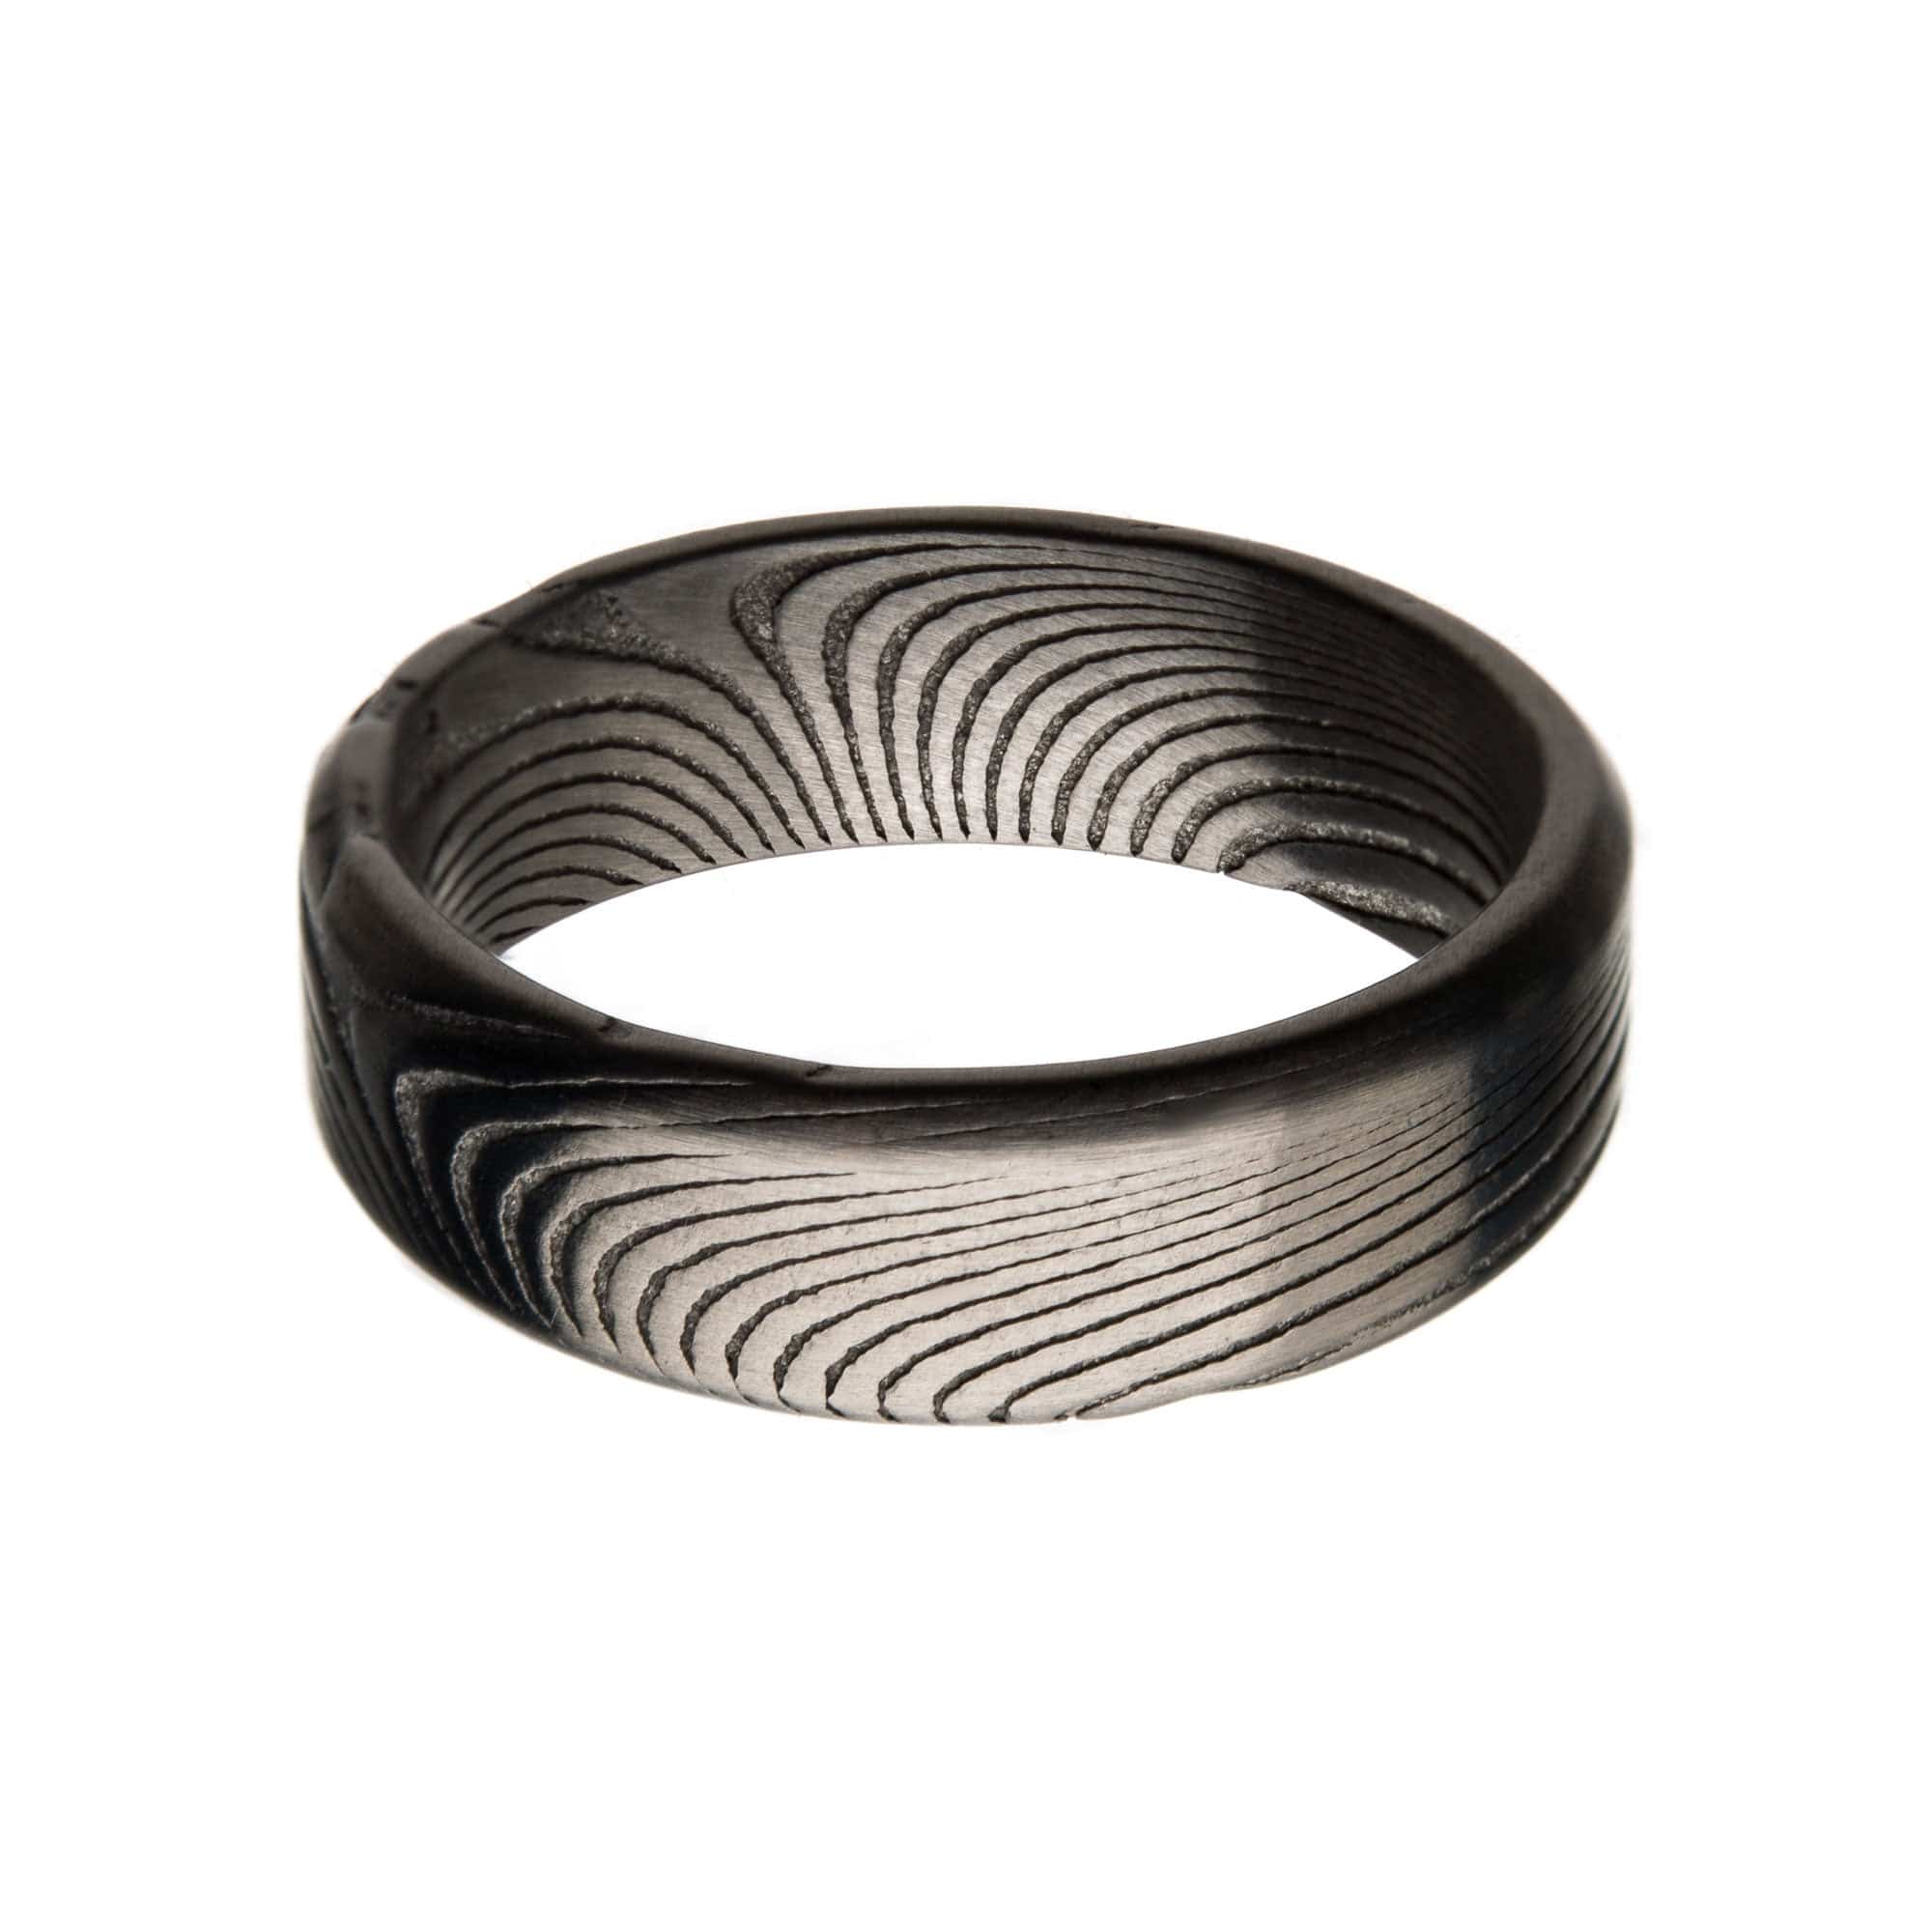 INOX JEWELRY Rings Damascus Steel Silver Tone 7mm Band Ring